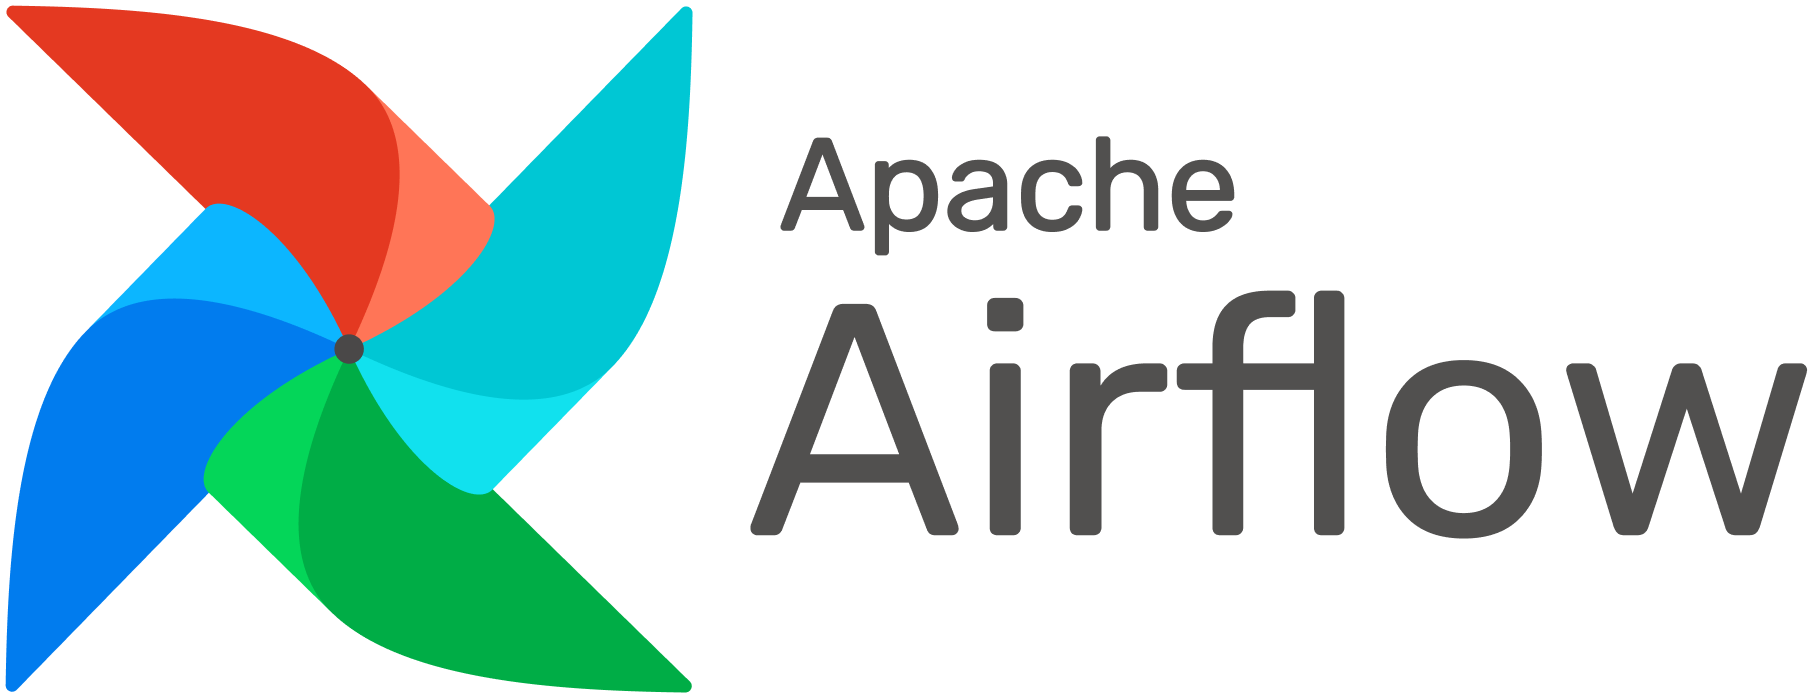 Data Pipeline Orchestration: Apache Airflow and Similar Tools 3